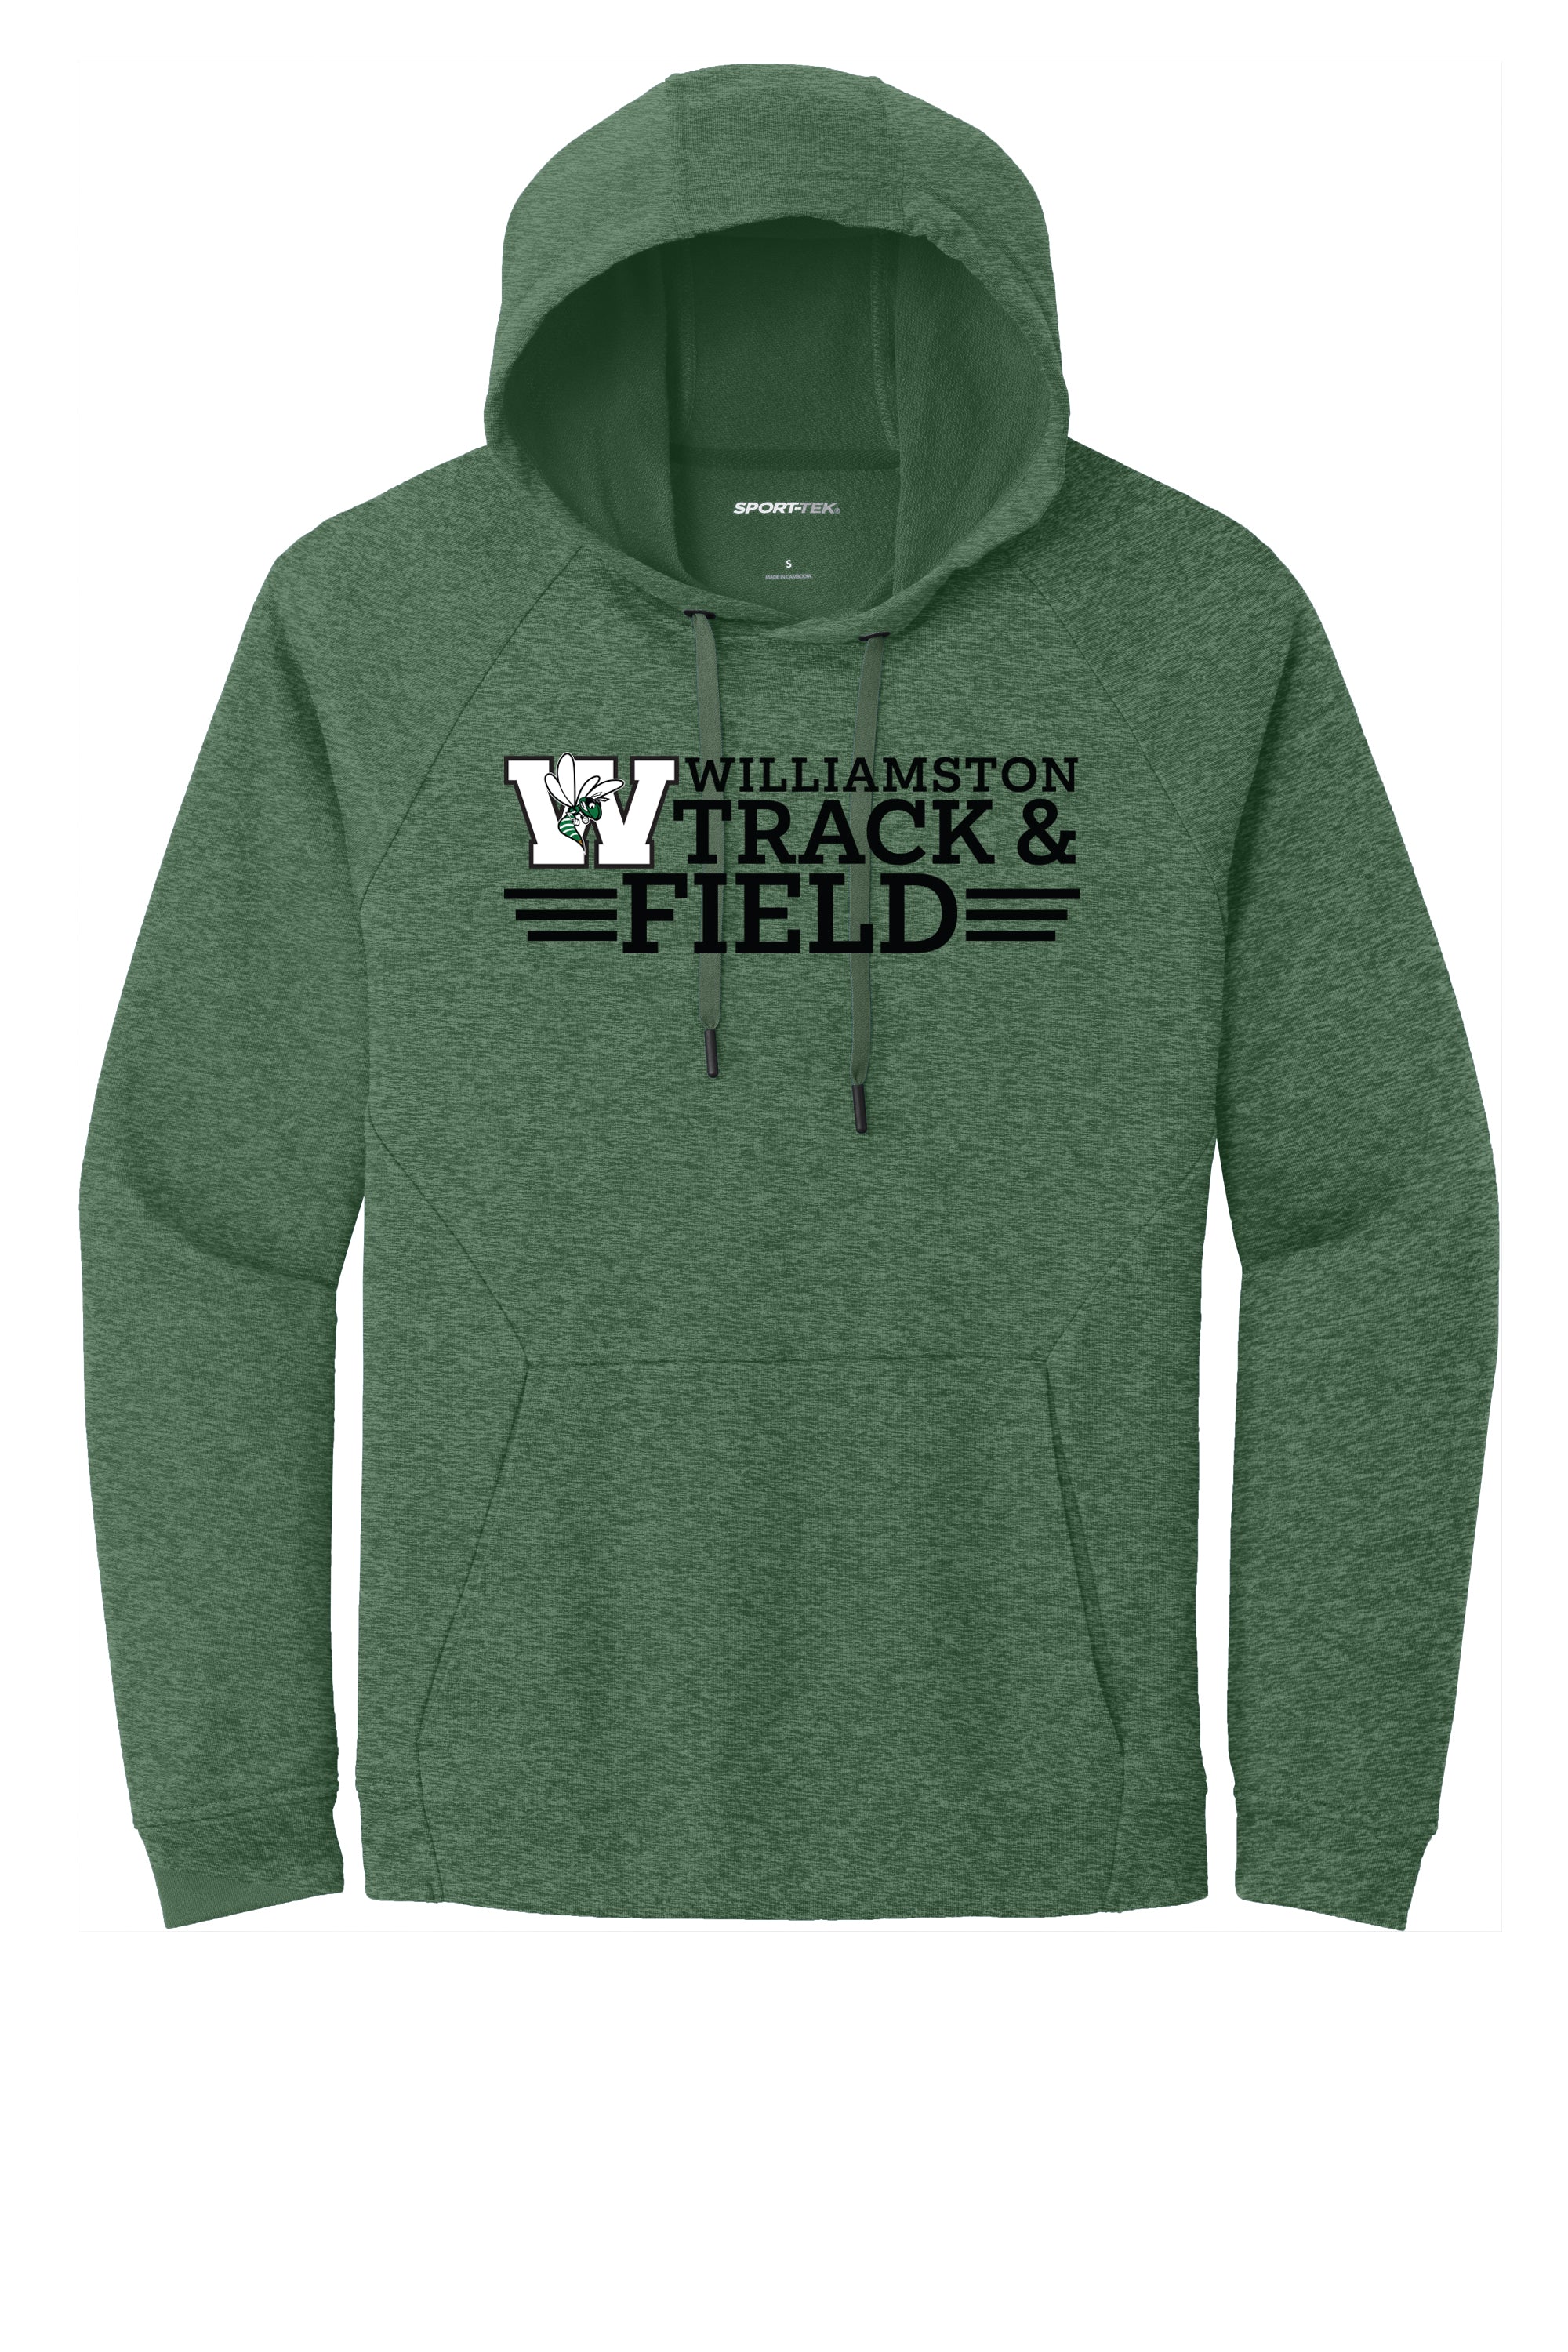 Williamston Track and Field - Lightweight Pullover Hoodie